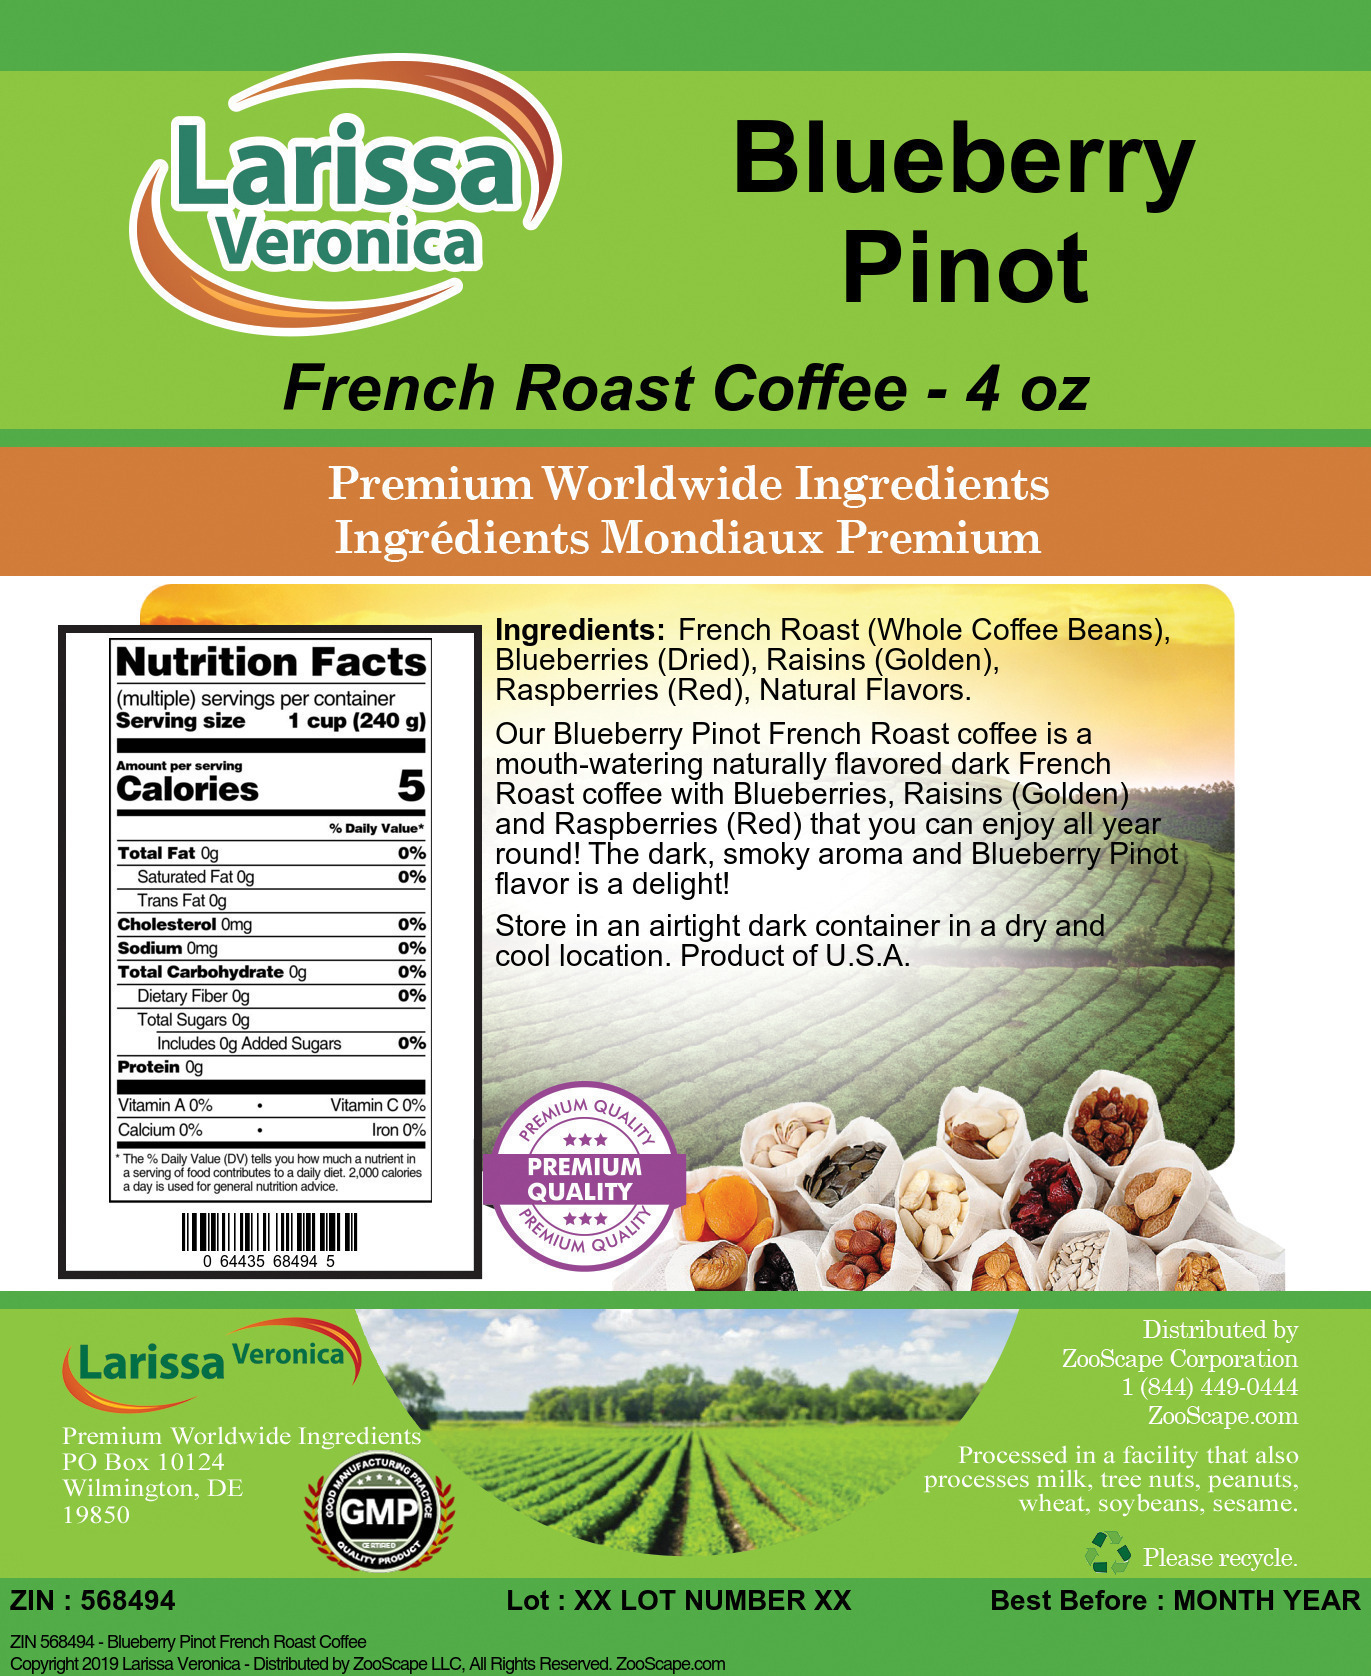 Blueberry Pinot French Roast Coffee - Label